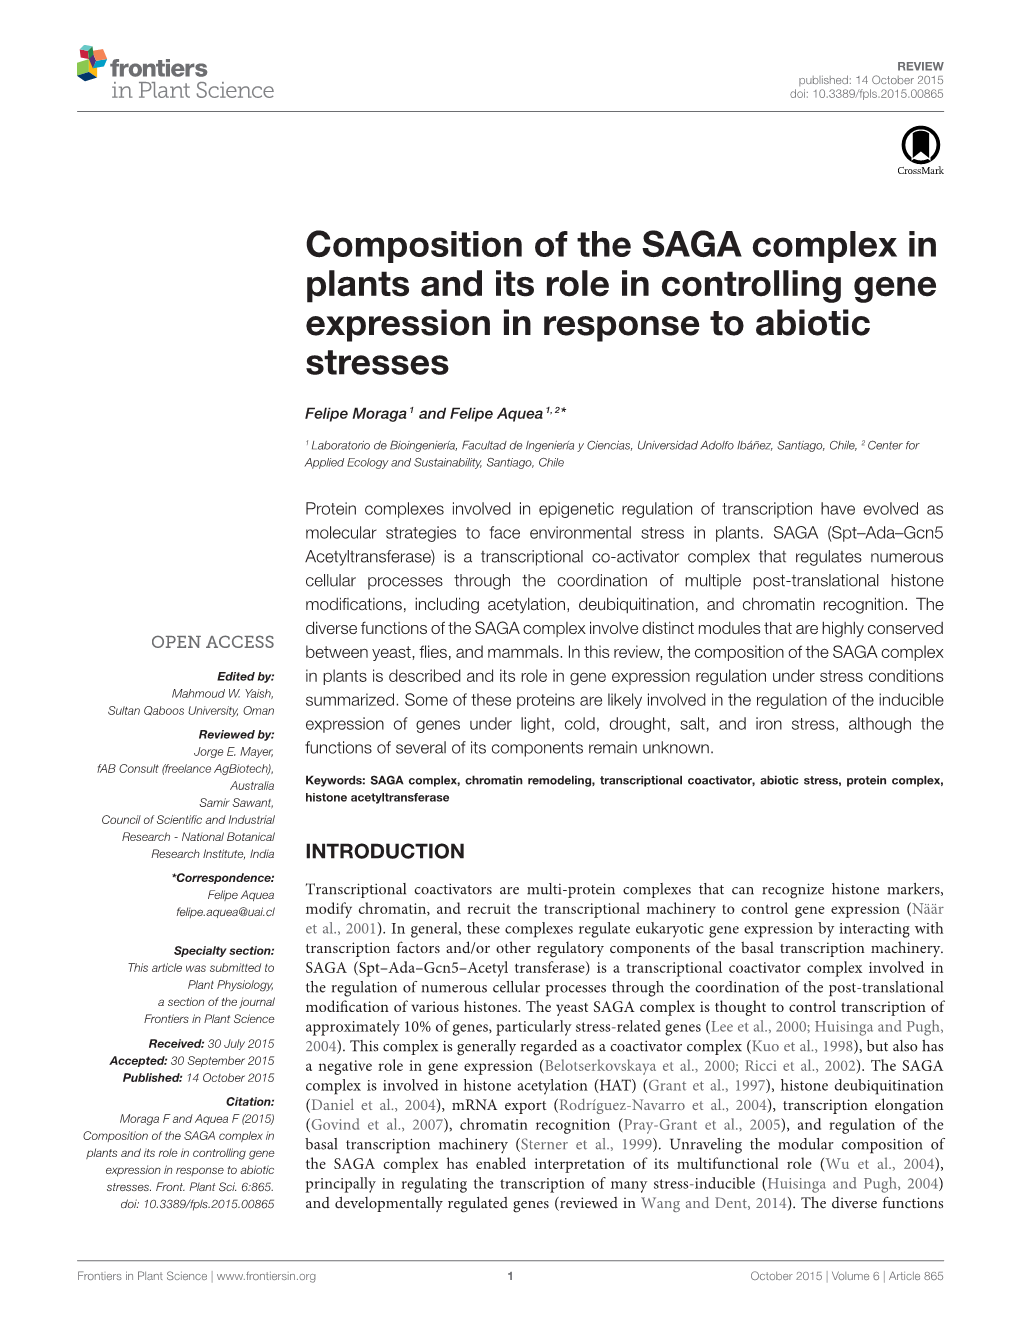 Composition of the SAGA Complex in Plants and Its Role in Controlling Gene Expression in Response to Abiotic Stresses